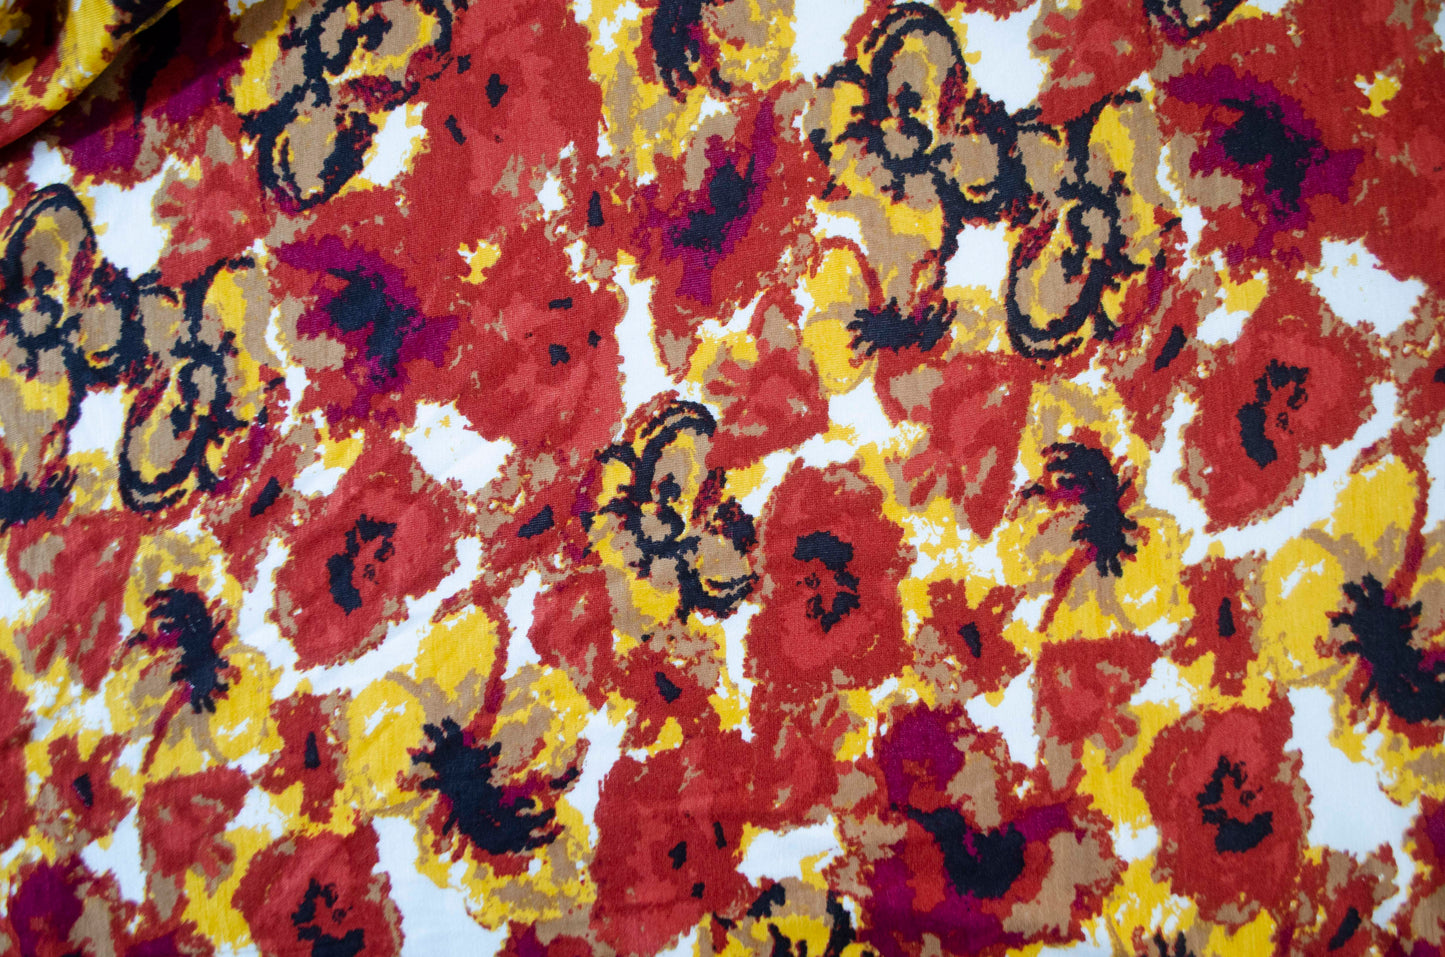 Floral Rayon/Spandex in Deep Reds